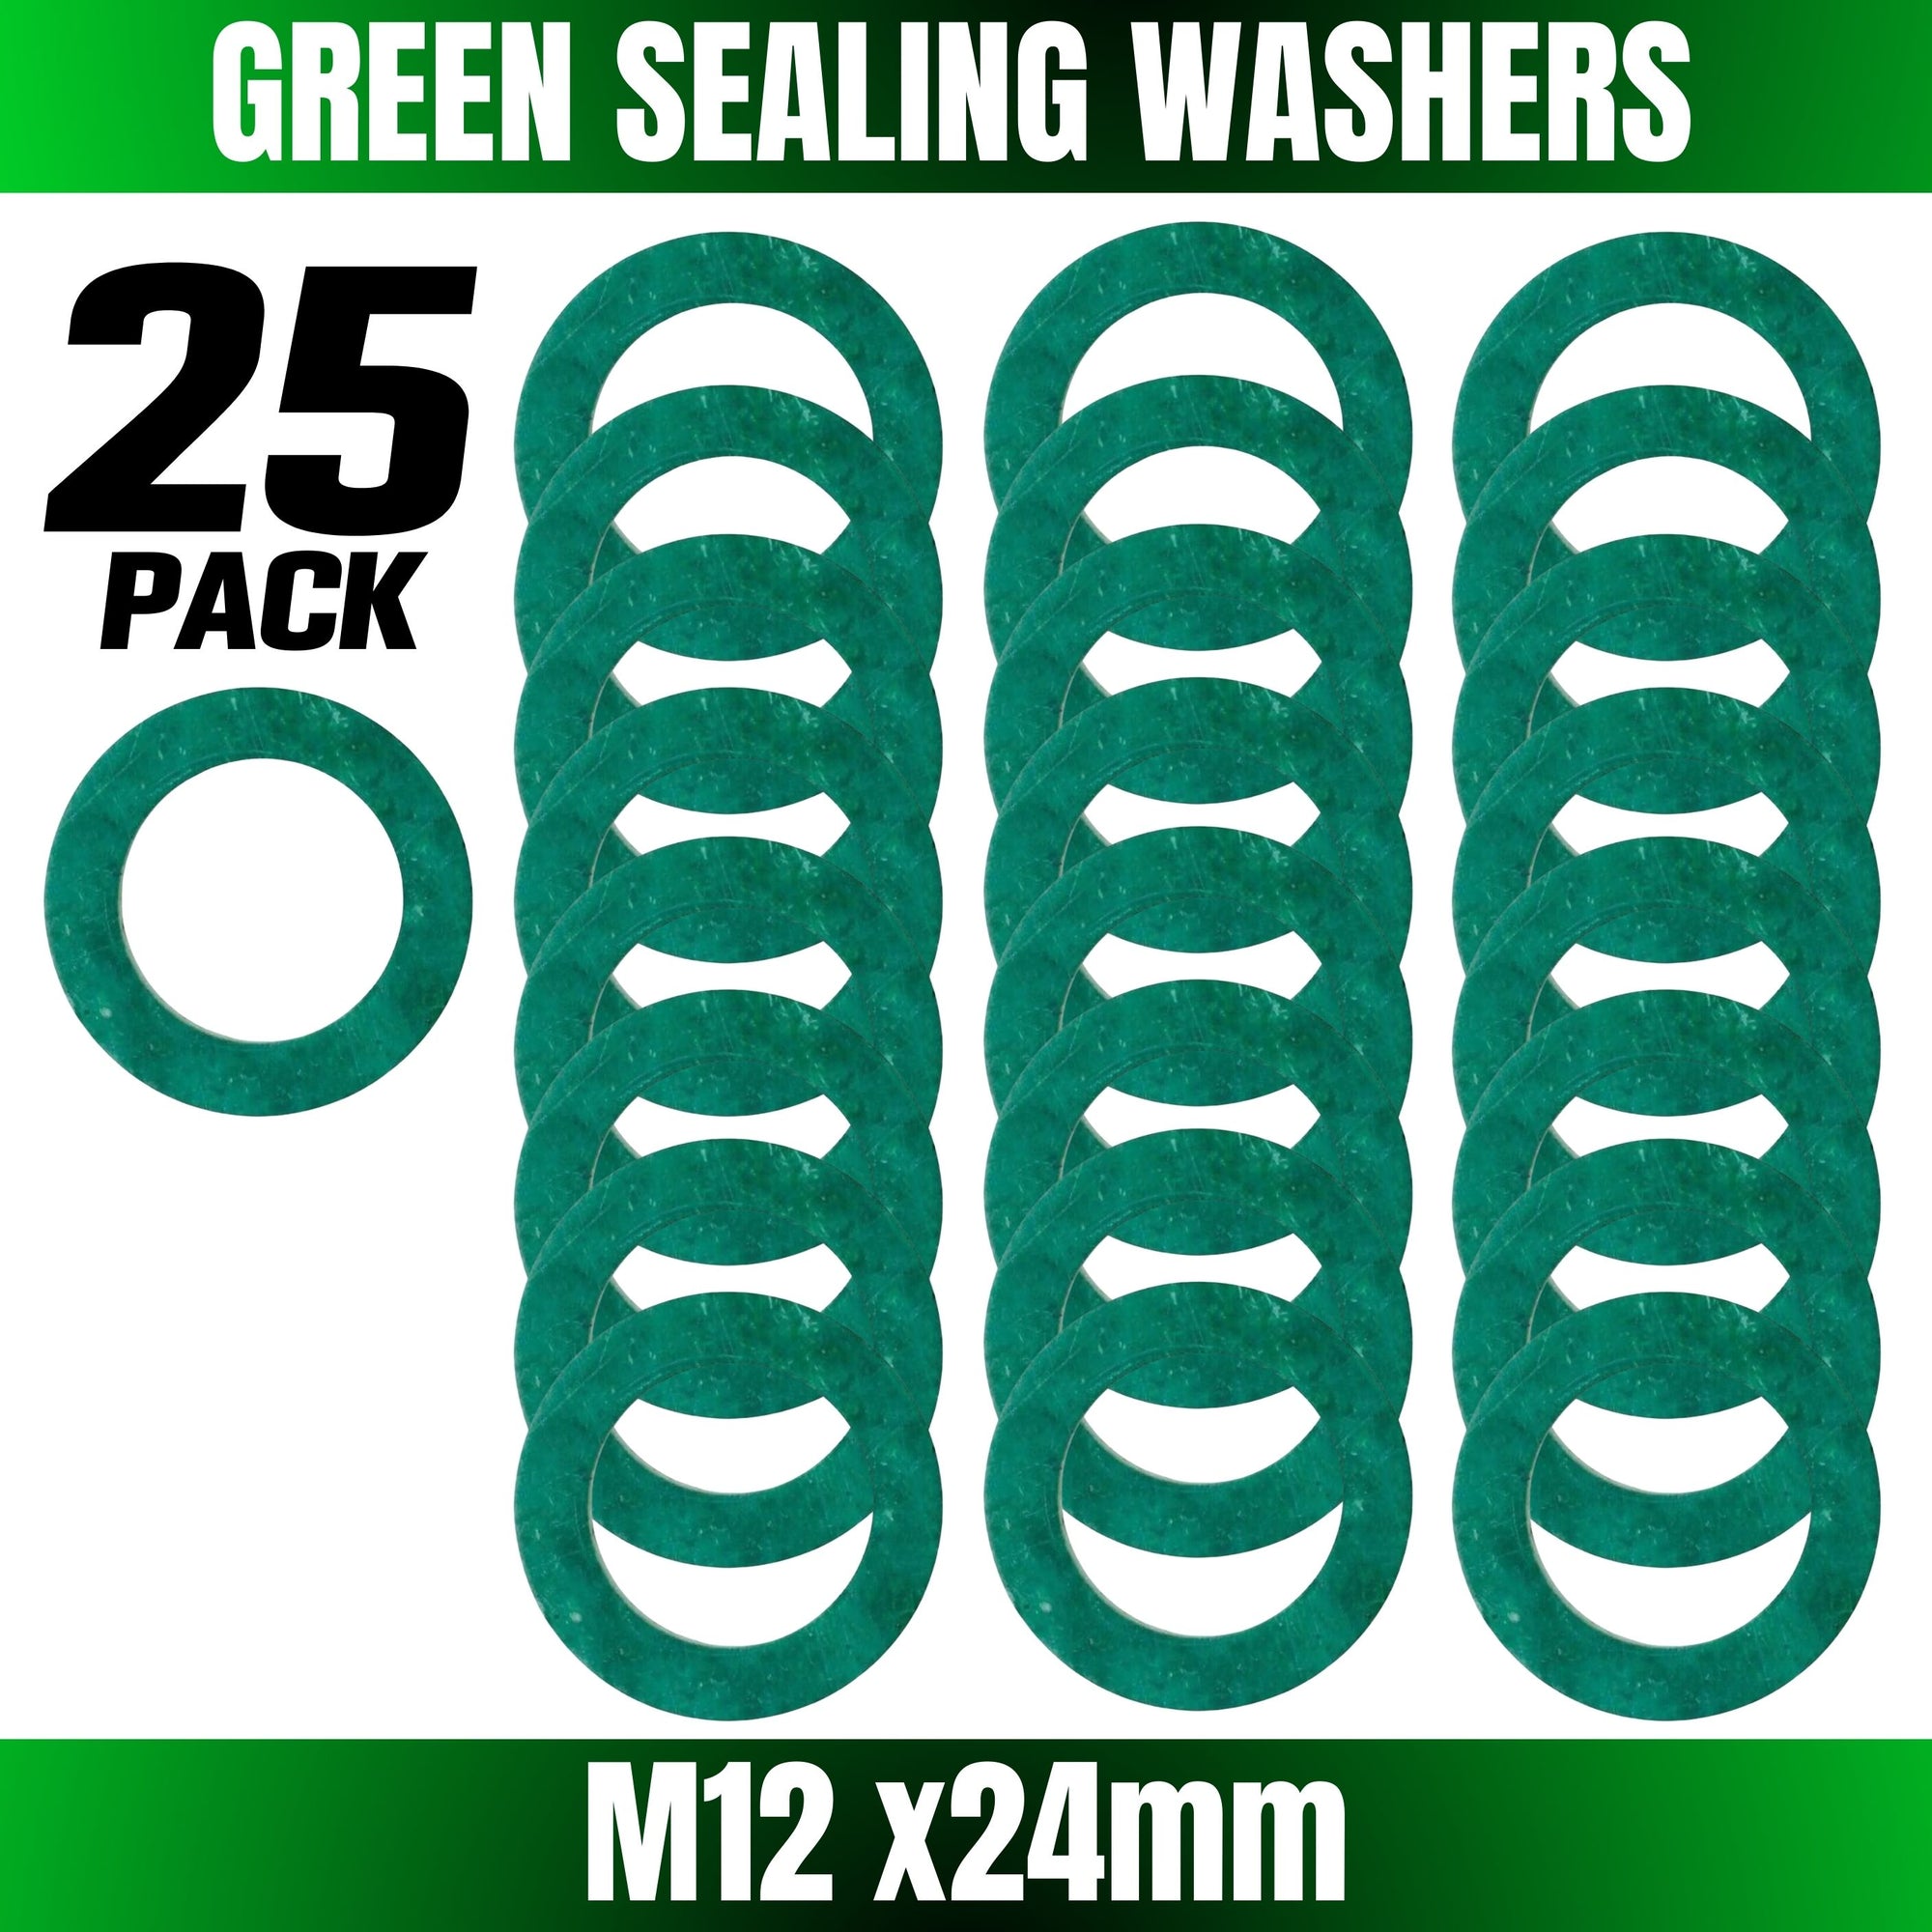 GREEN SEALING WASHER 25 PACK - South East Clearance Centre